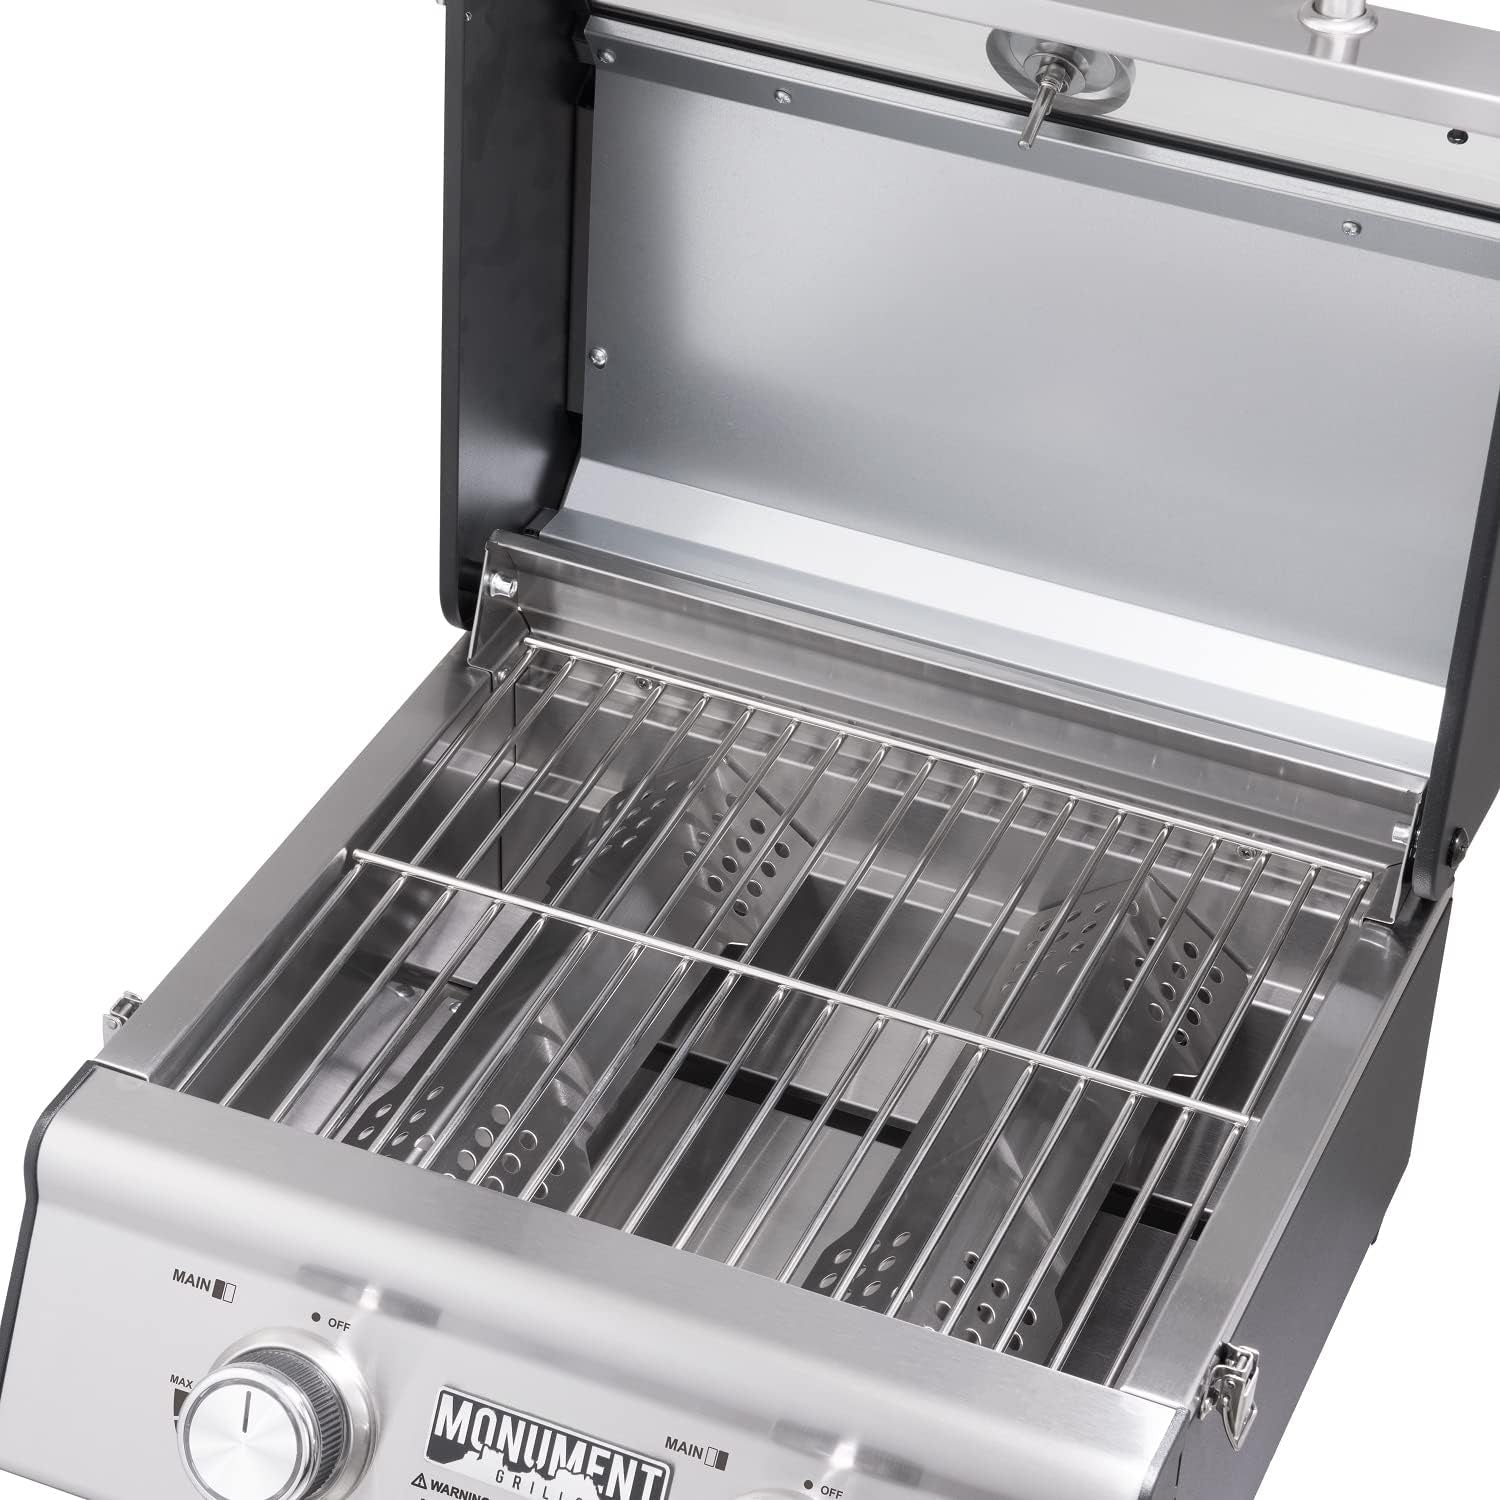 Portable Propane Gas Grill 2-Burner Tabletop Clearview  for Outdoor Camping Cooking, Two 15,000 BTU Burners, Stainless Steel, and Built-In Thermometer